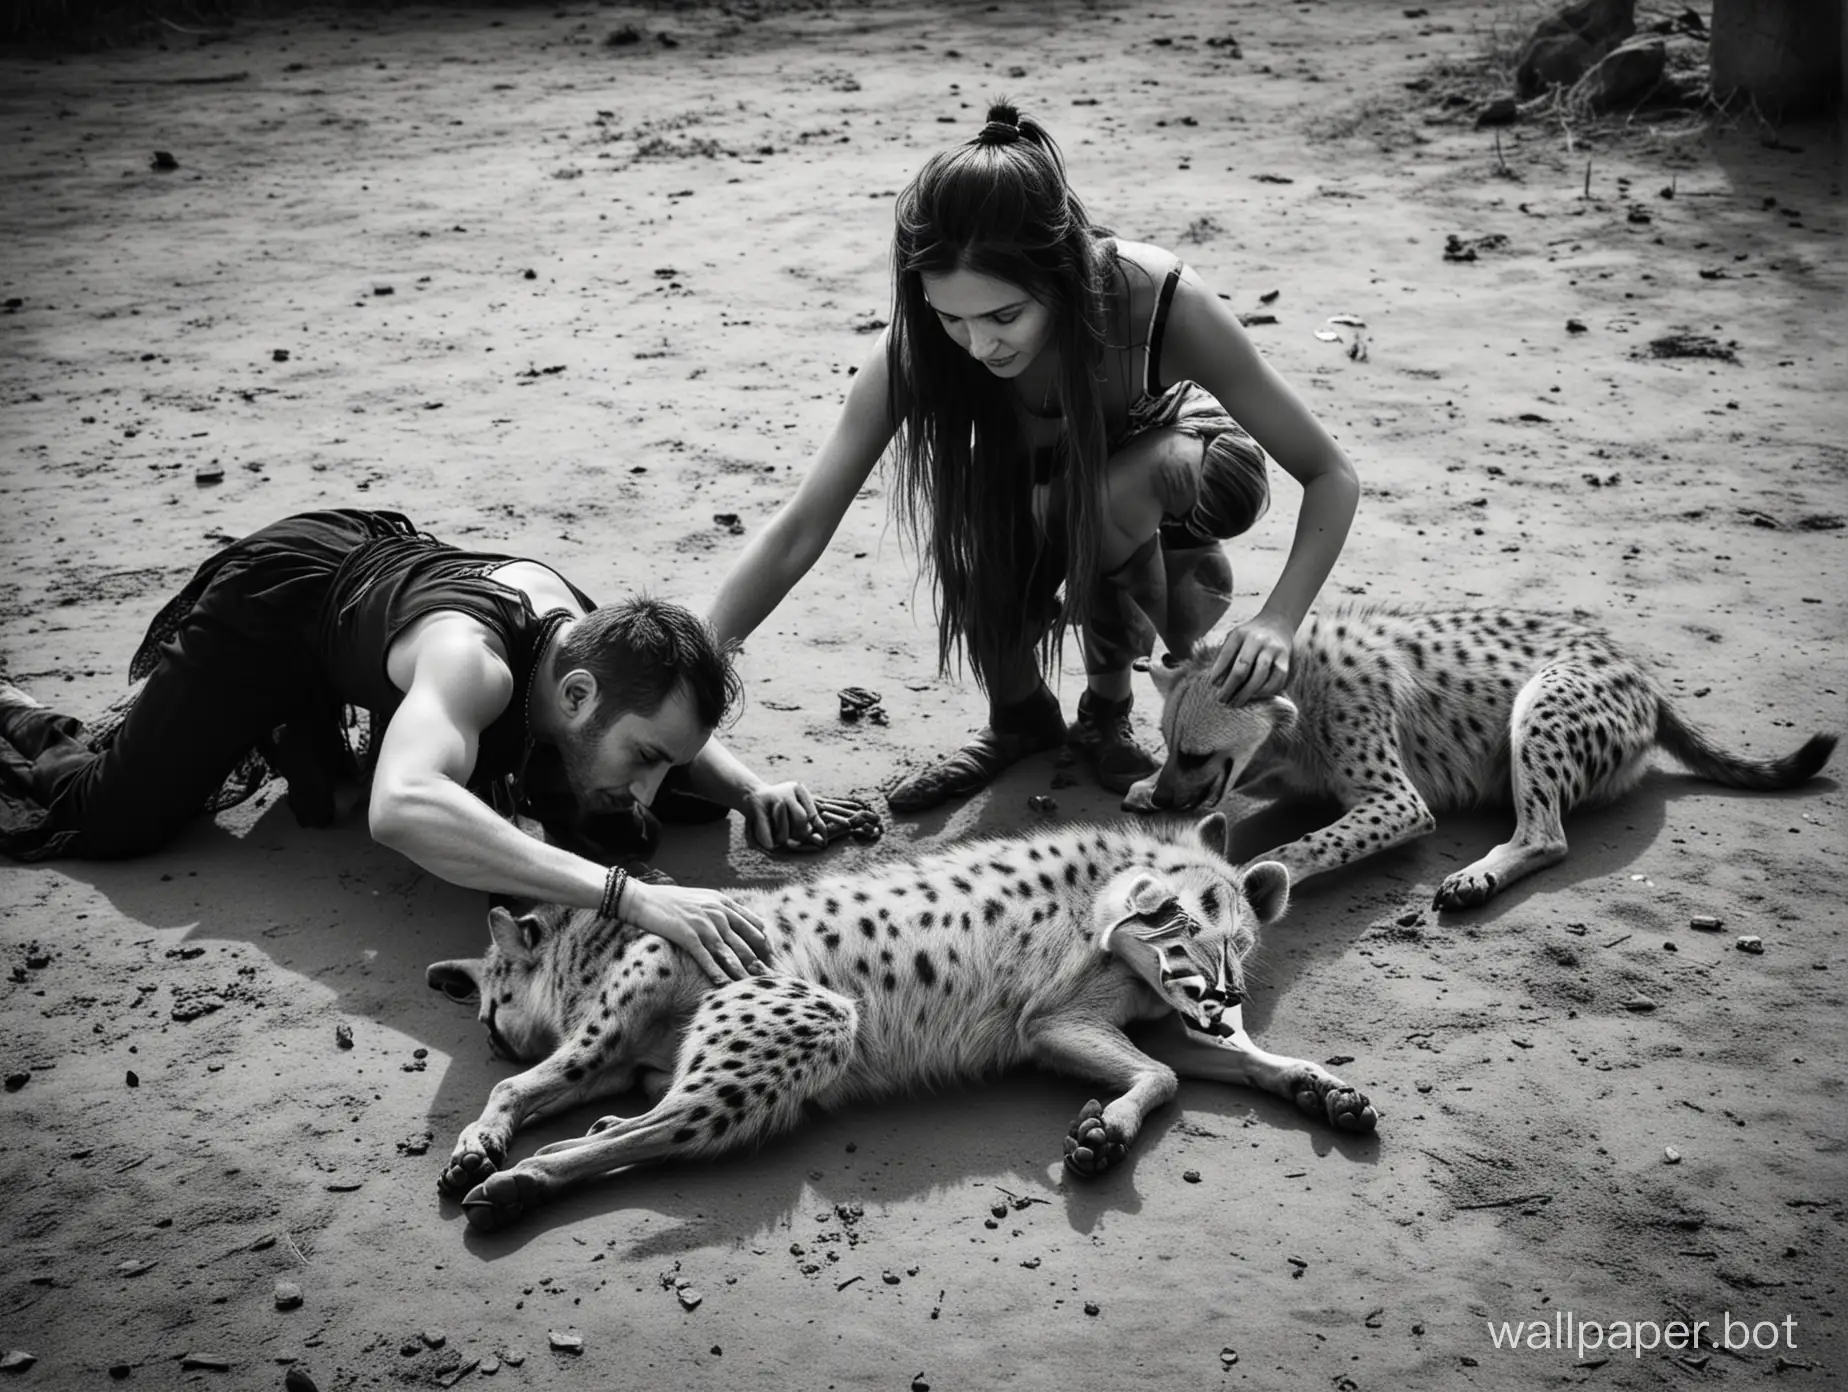 man lays woman , sacrifice of a woman, girl doing satanic ritual , doing ritual in,black and white photography, high contrast photography, sharp super contrast, there is a hyena nearby